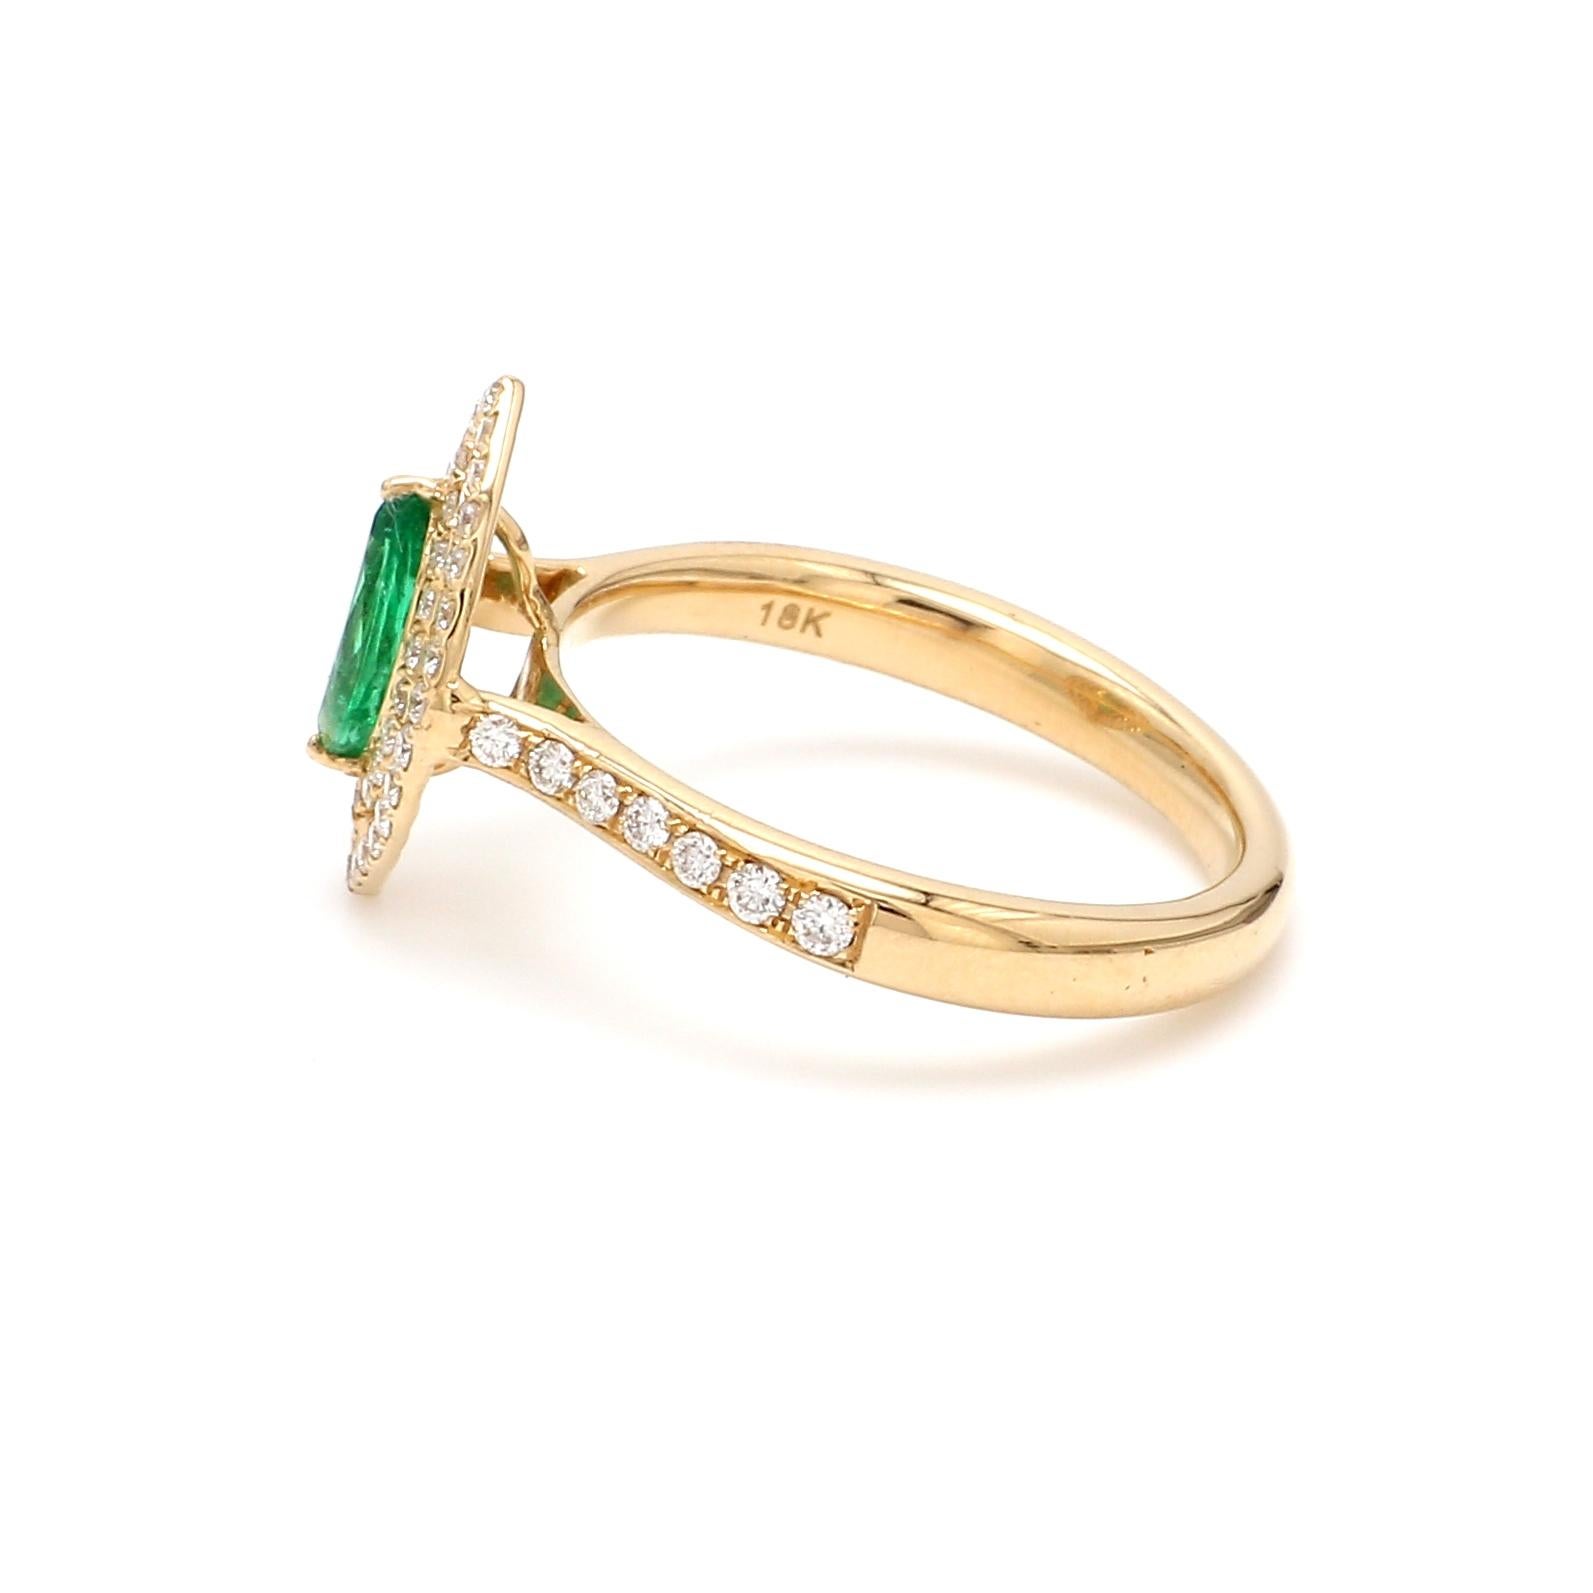 A Beautiful Handcrafted Ring in 18 Karat Yellow Gold  with Natural Emerald in Marquise Cut and Diamonds double Halo & Shank. A perfect Ring for occasion

 Emerald Details
Pieces : 1 Pieces Square Cut 
Weight : 0.38 Carat 
AAA Quality